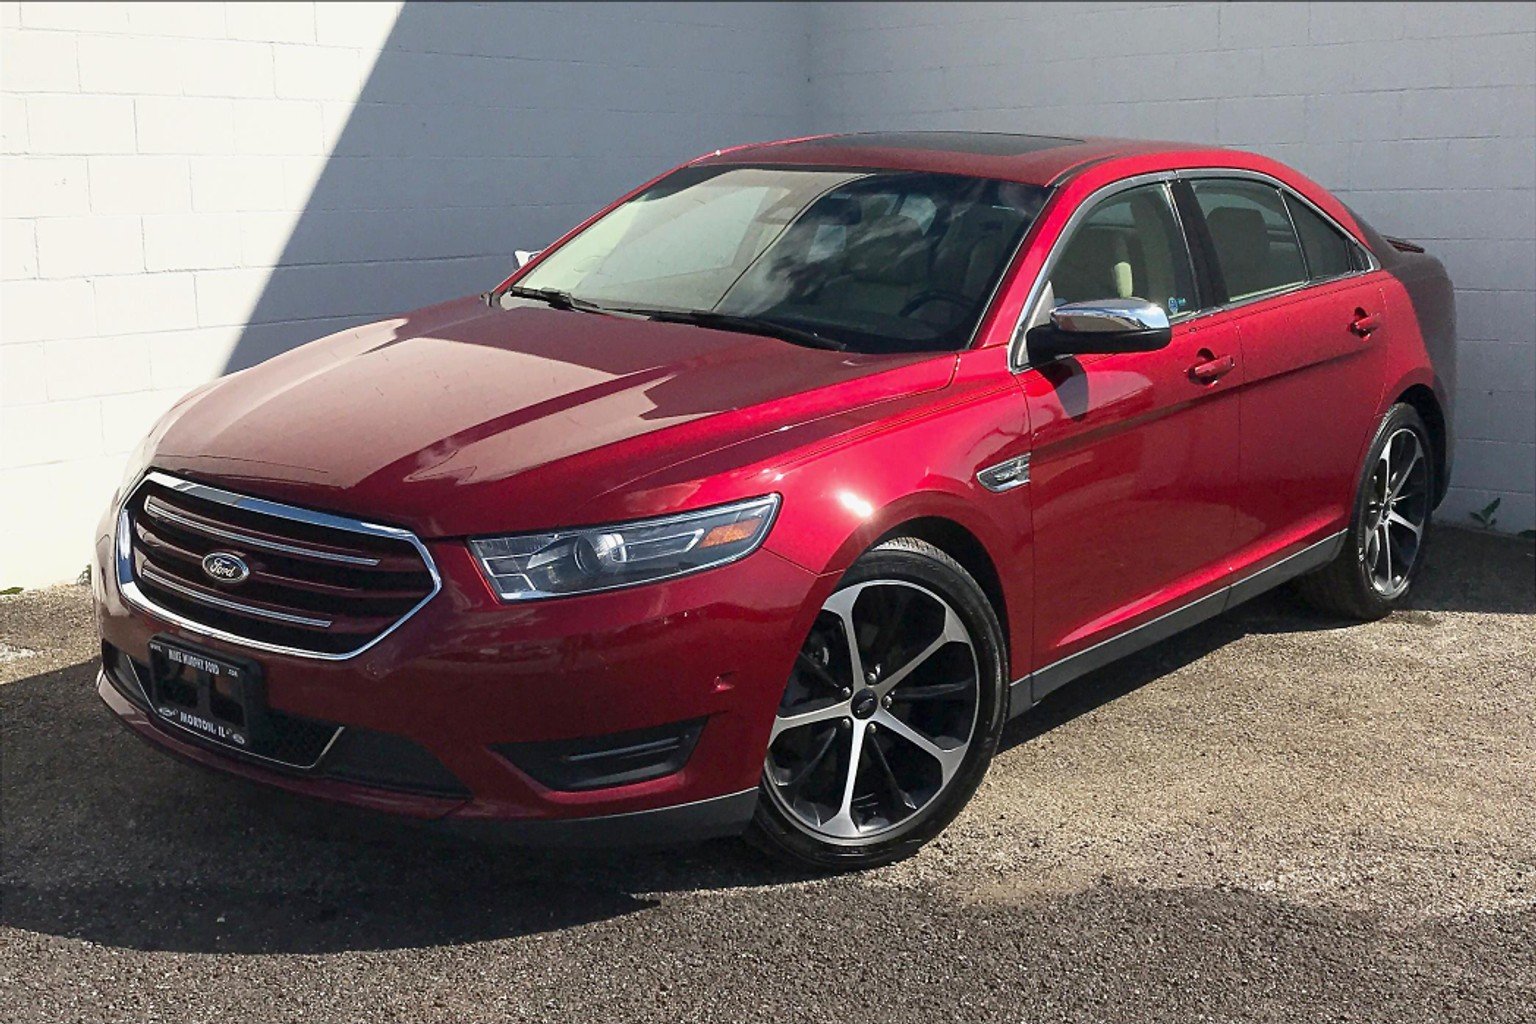 PreOwned 2015 Ford Taurus 4dr Sdn Limited AWD 4dr Car in Morton